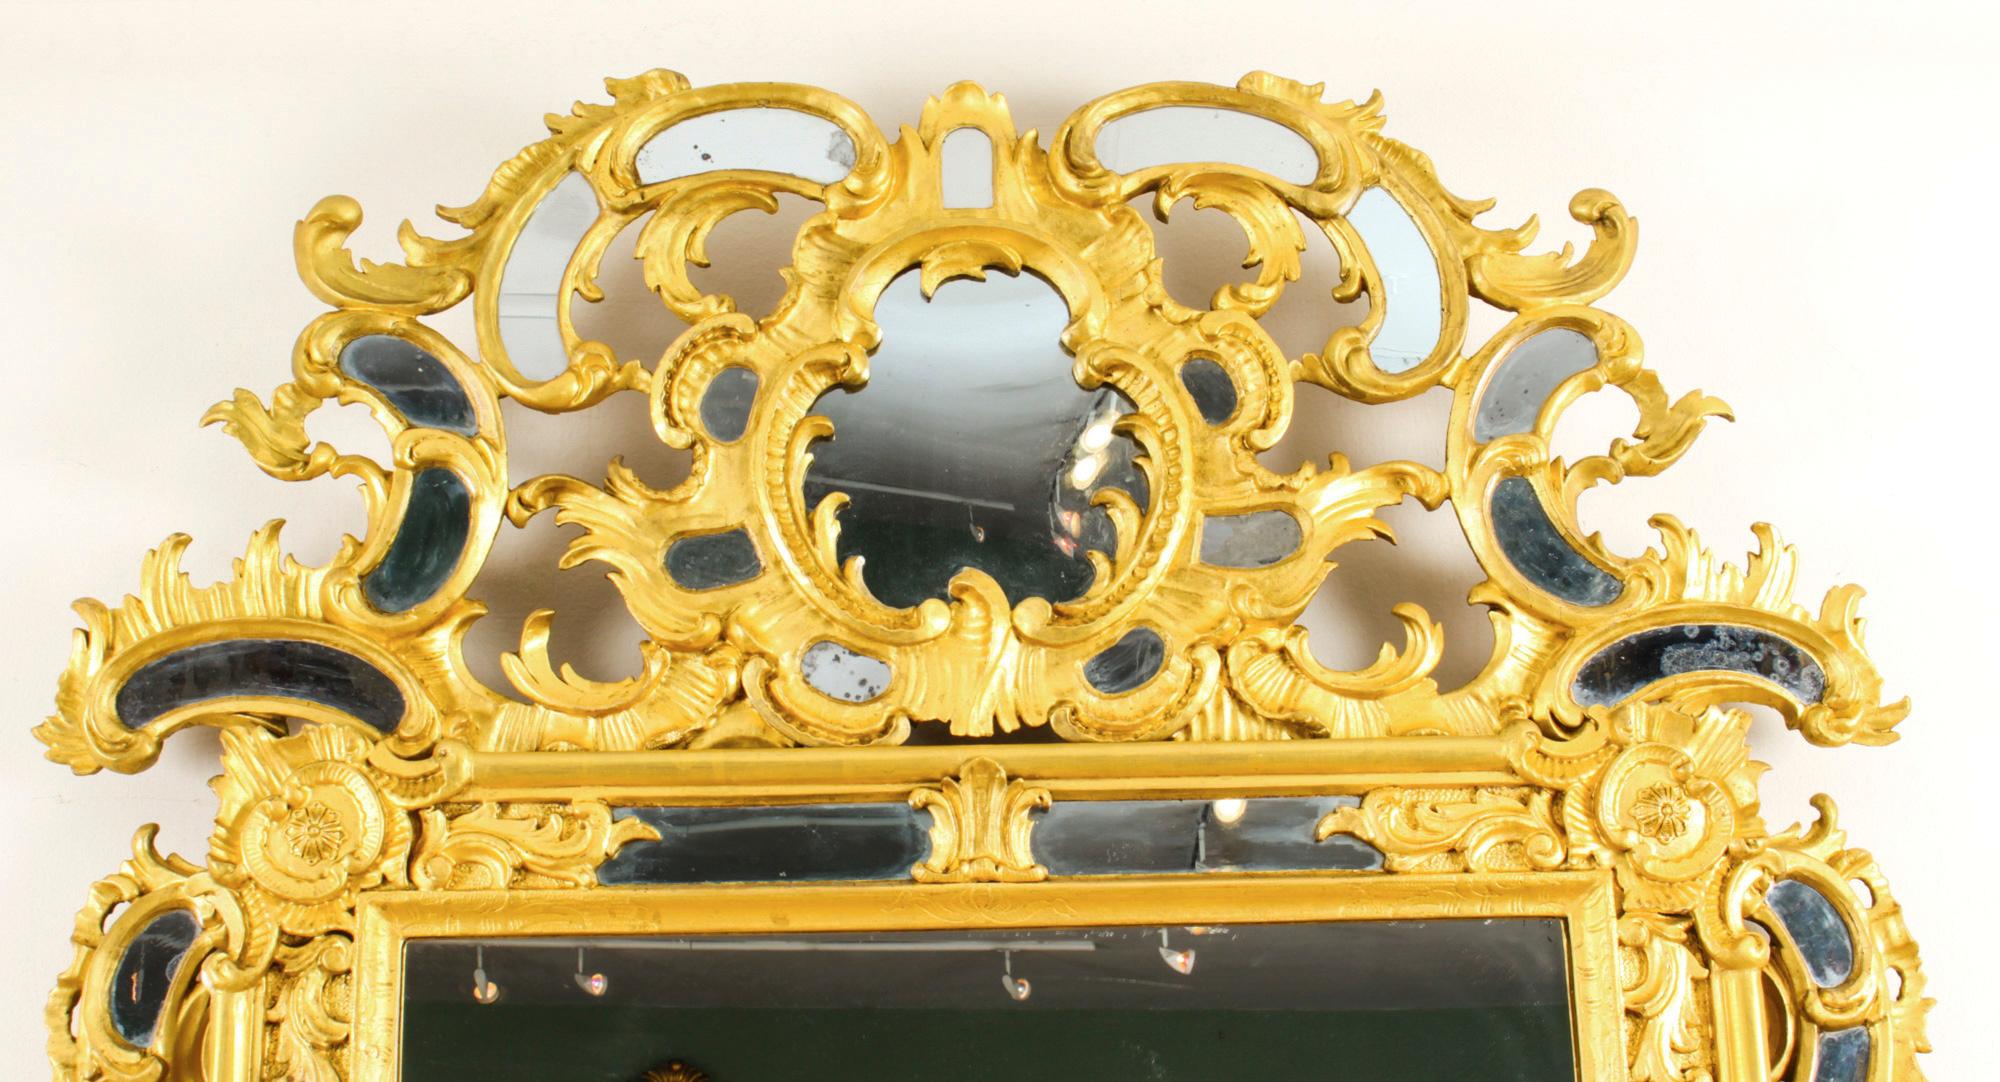 This is a spectacular antique French Rococo giltwood overmantle mirror, circa 1780 in date.

The shaped symmetrical frame with central mirror plate that is framed with marginal side plates. It is a profusely carved giltwood frame decorated with C